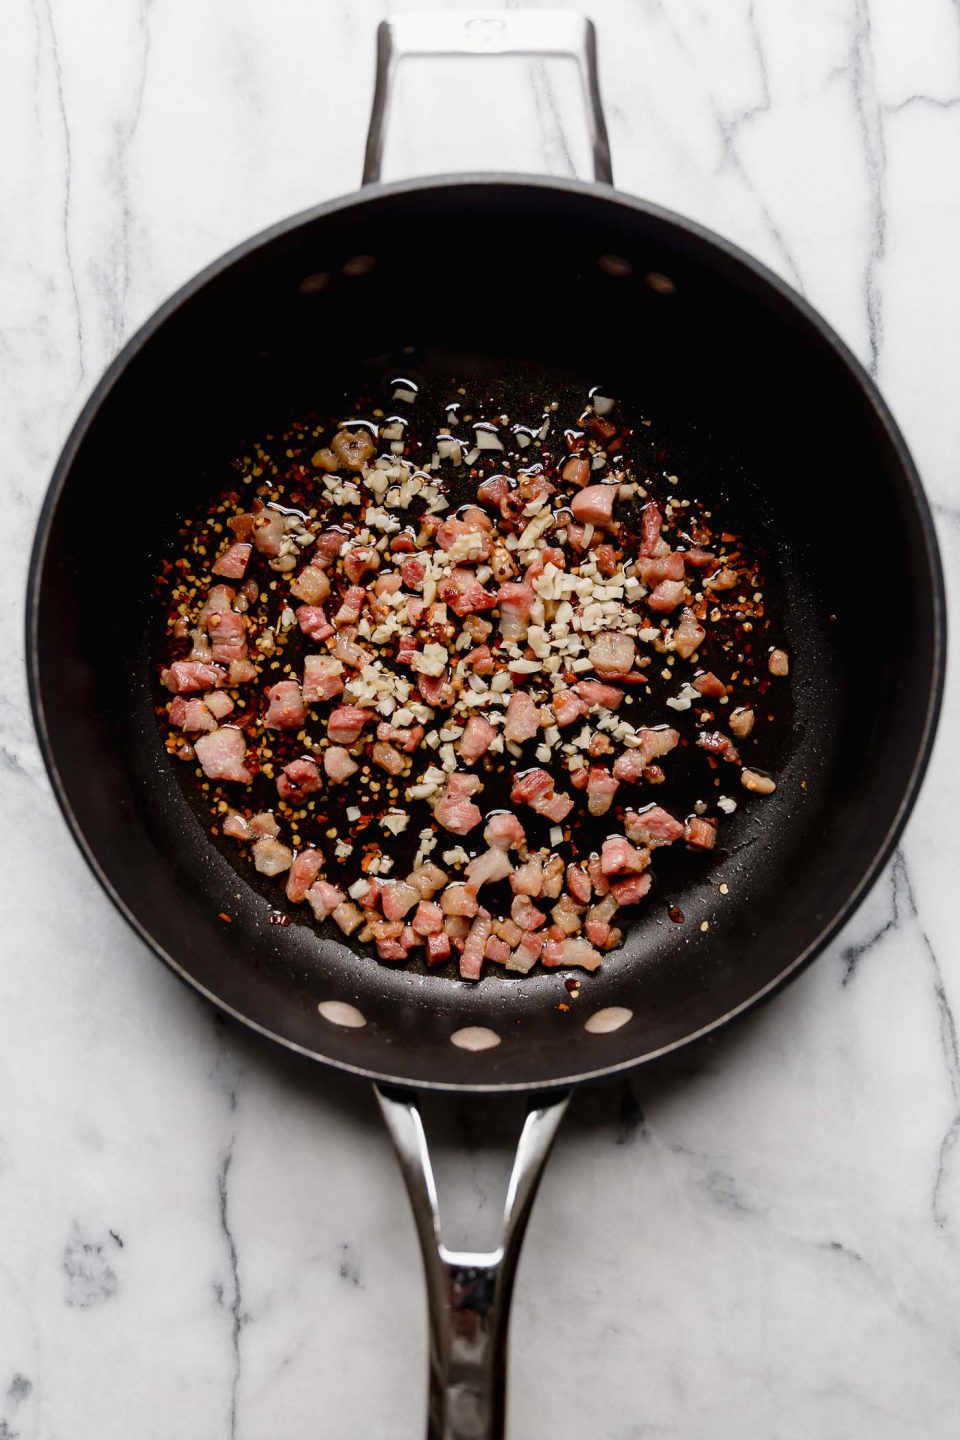 How to make Amatriciana sauce, Step 1: Pancetta, garlic, and red chili flakes in a skillet.